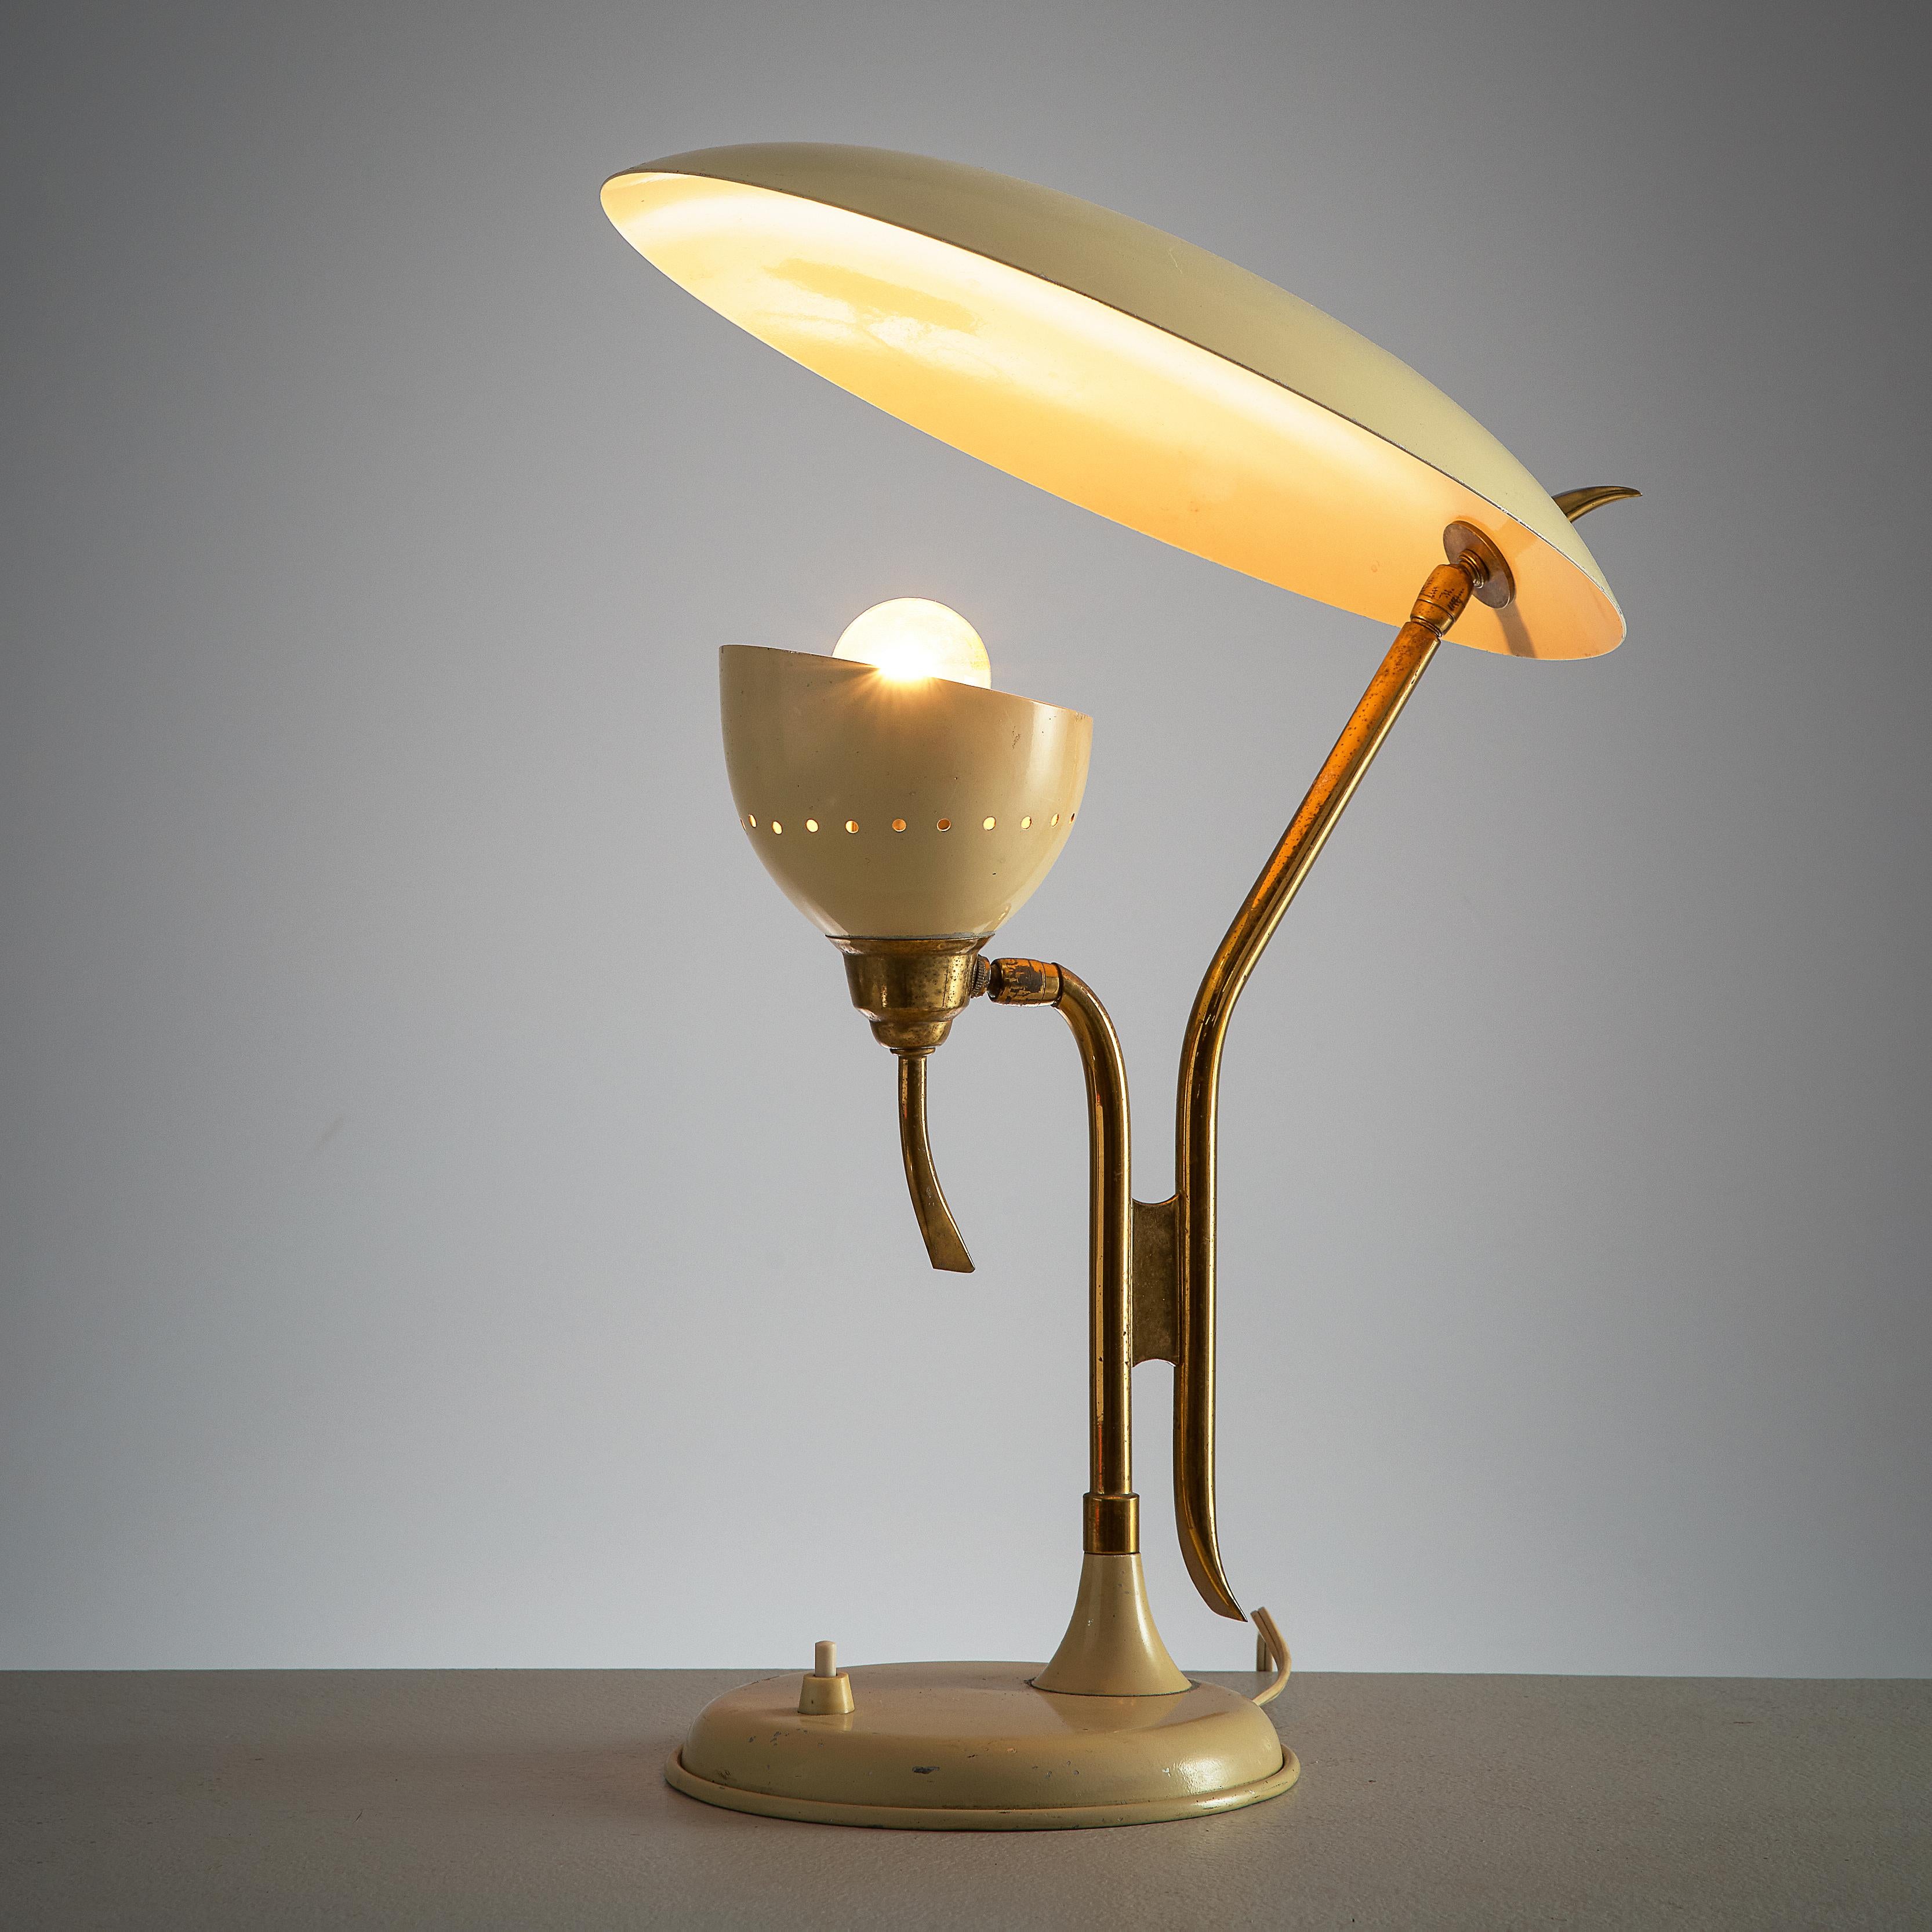 Lumen, table lamp, beige metal, brass, Italy, 1950s.

This 1950s adjustable beige desk light is manufactured by Lumen. The metal stem is holding a small upwards opening shade with a light bulb that directs the light towards the semicircular shade.